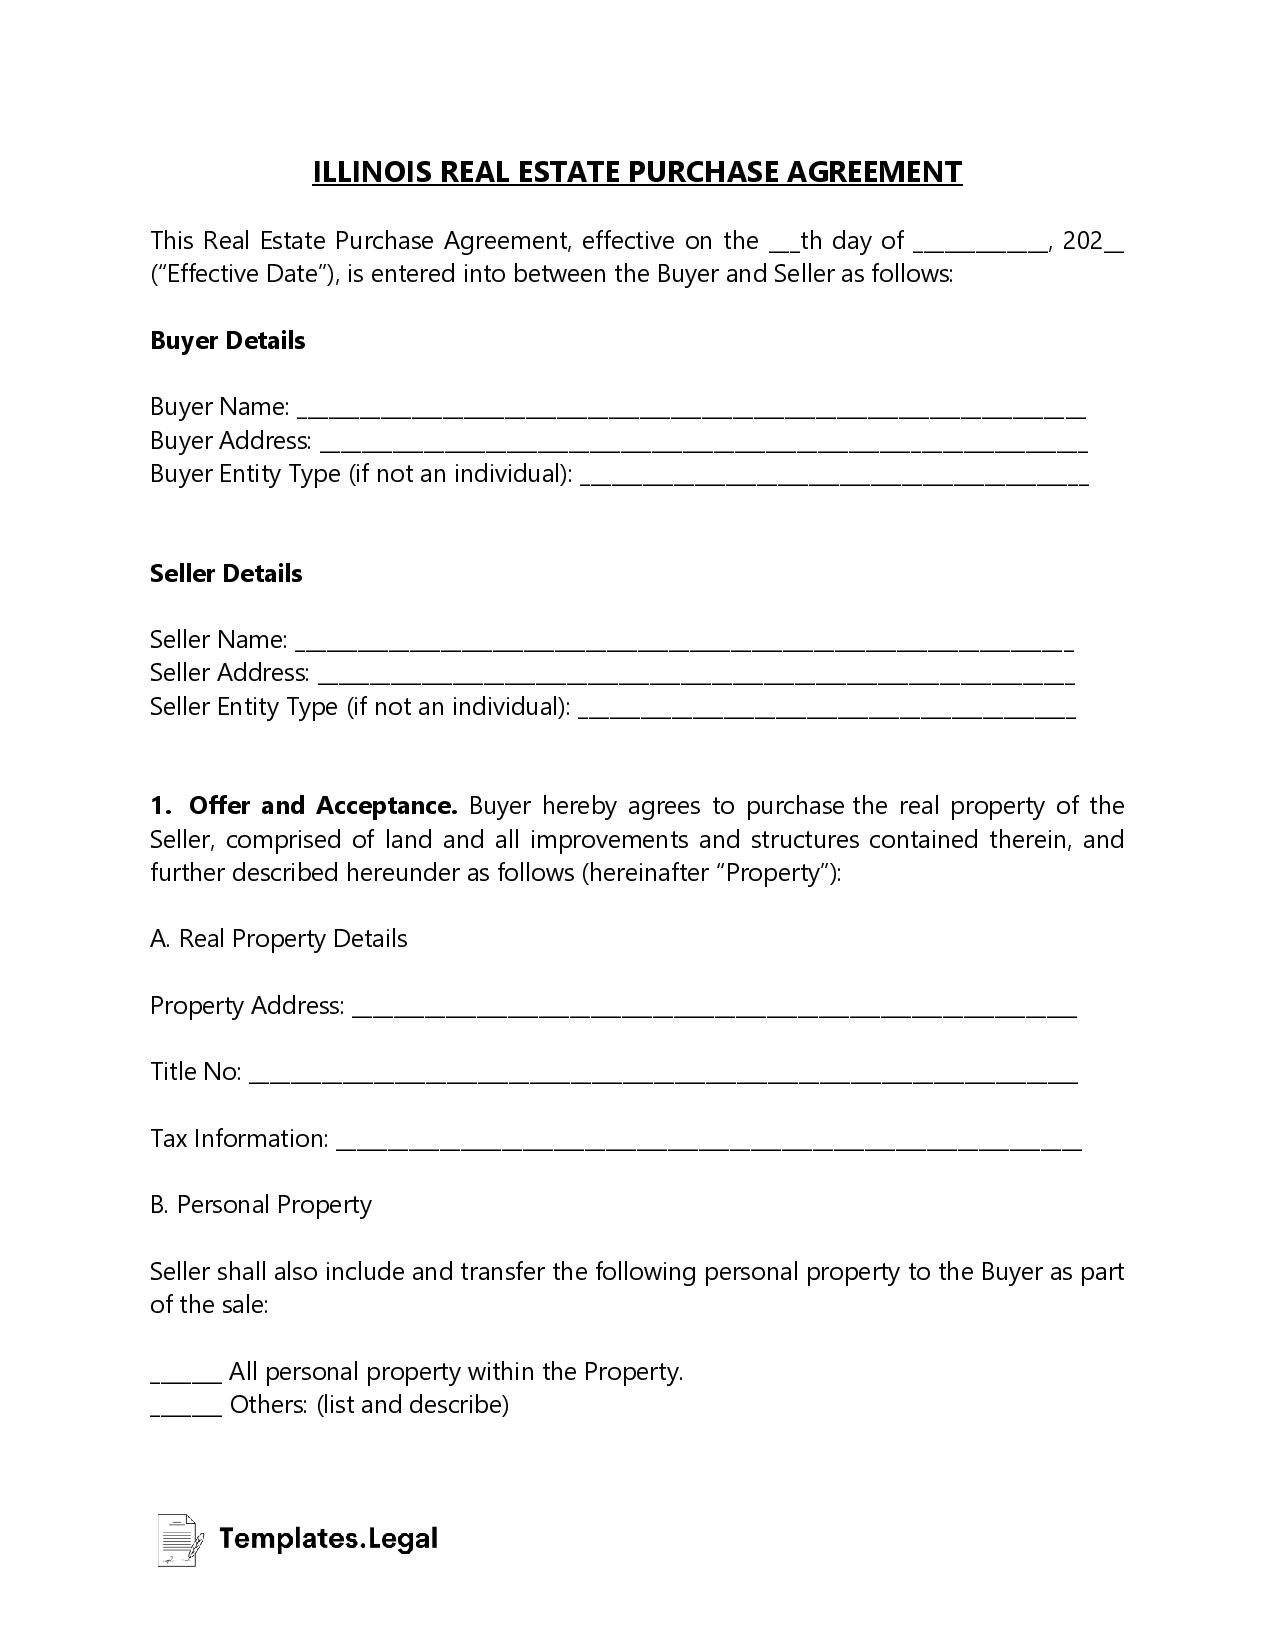 Illinois Real Estate Purchase Agreement - Templates.Legal